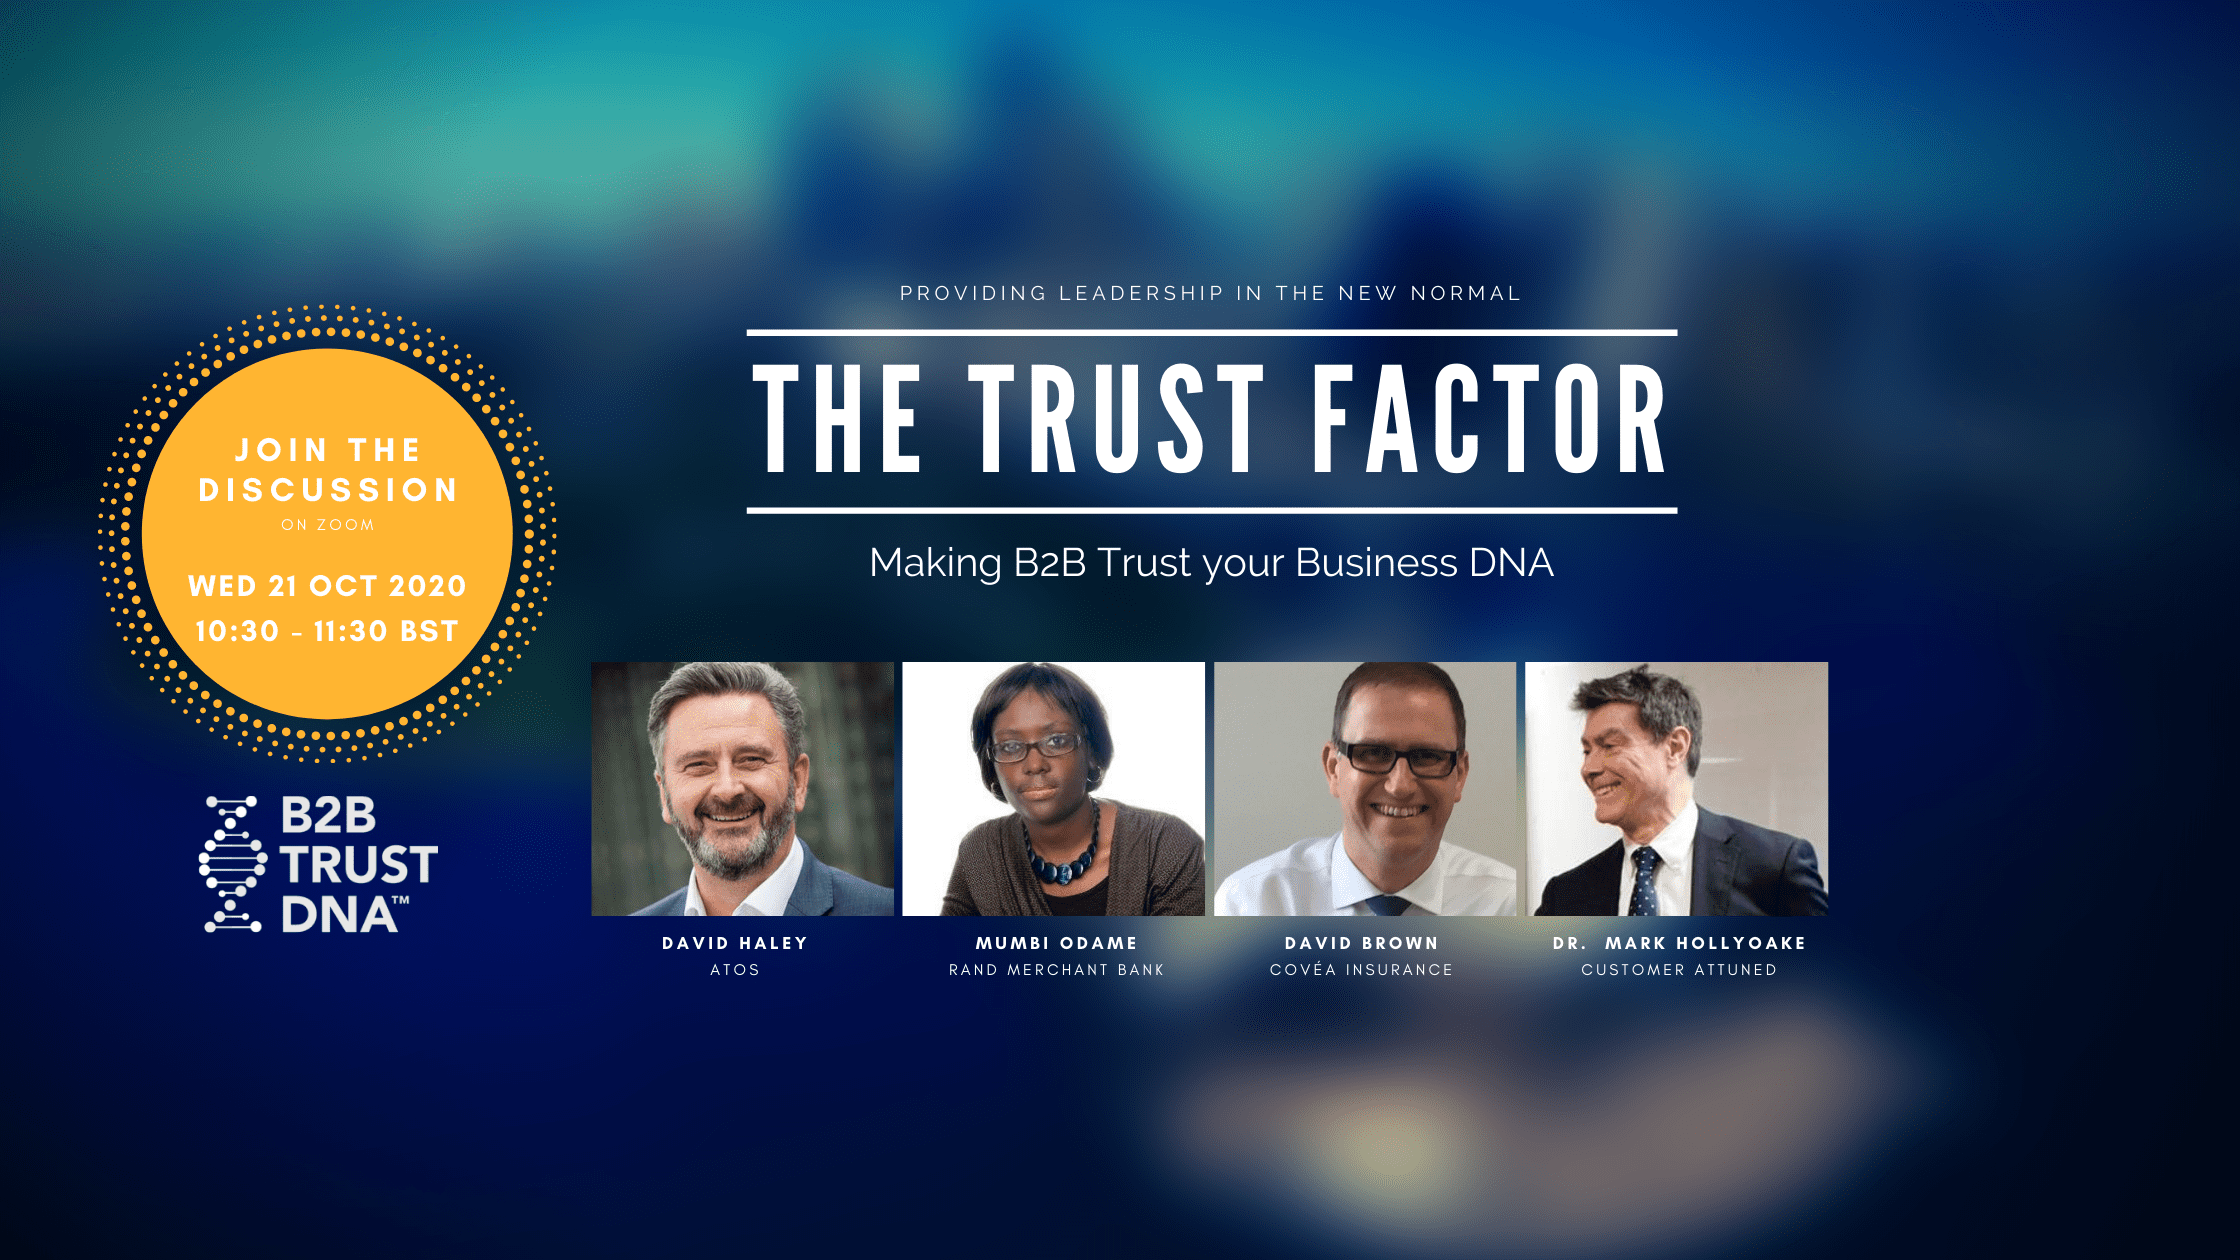 The Trust Factor - making B2B Trust Your Business DNA